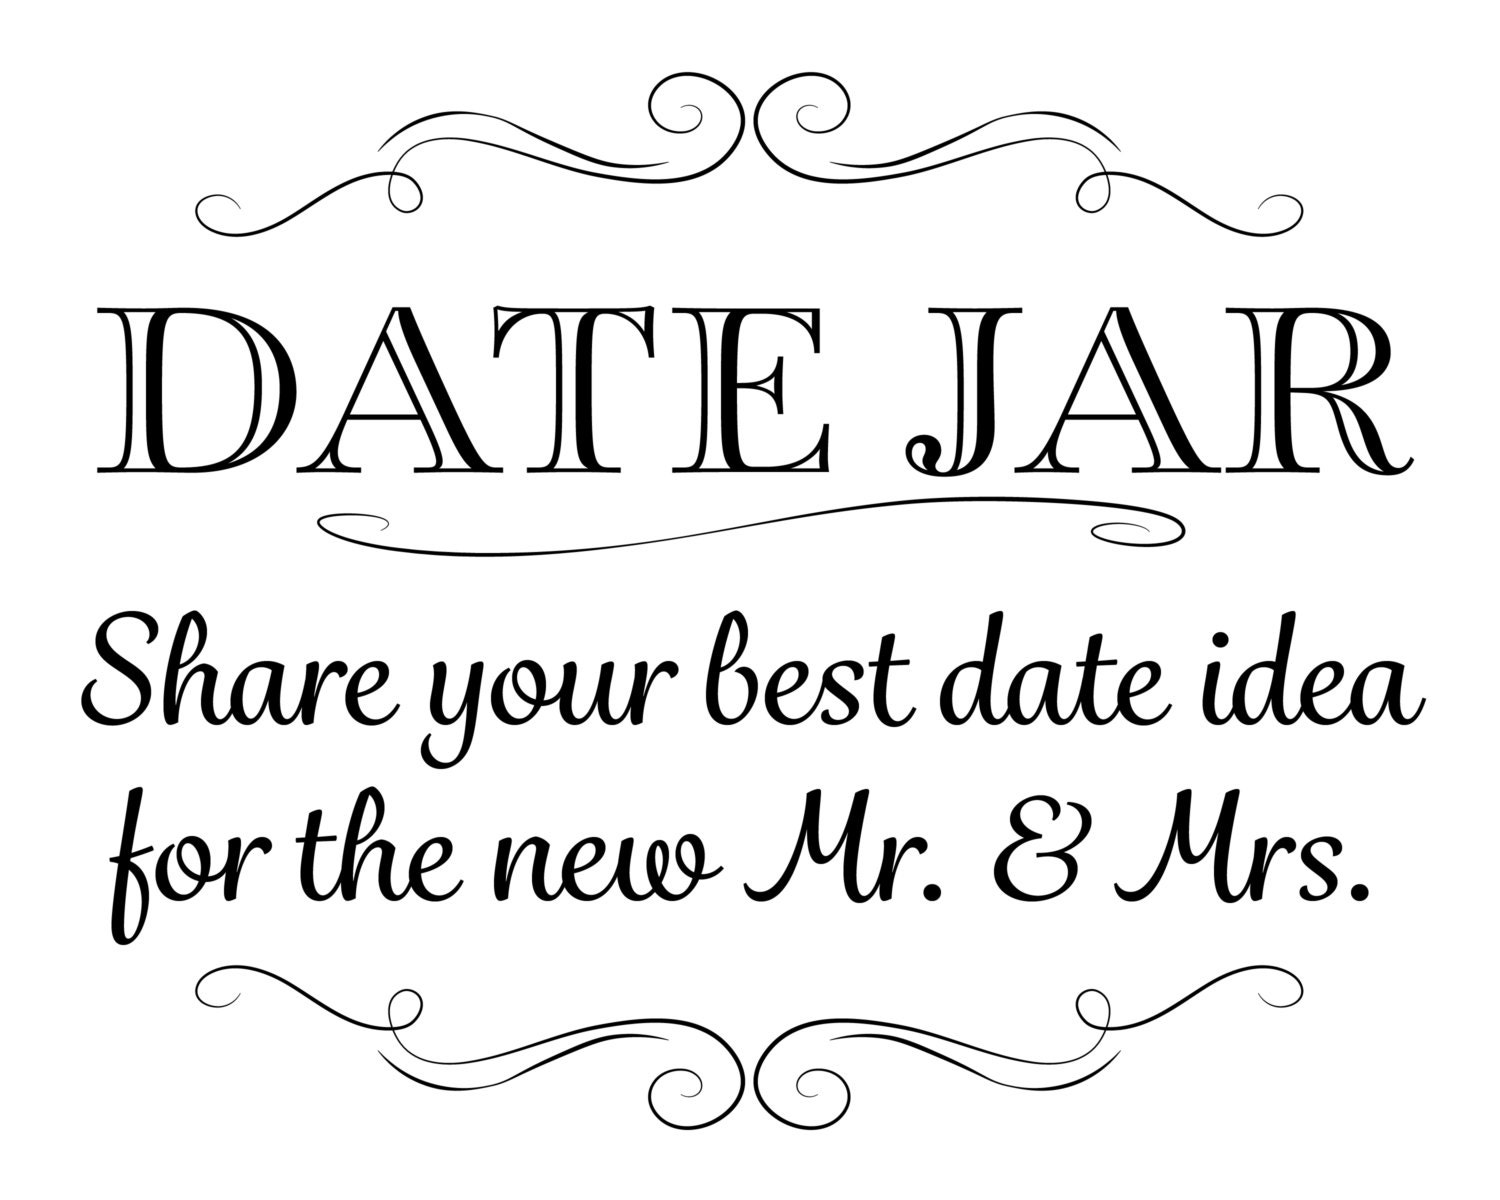 printable-wedding-sign-date-jar-share-your-best-date-idea